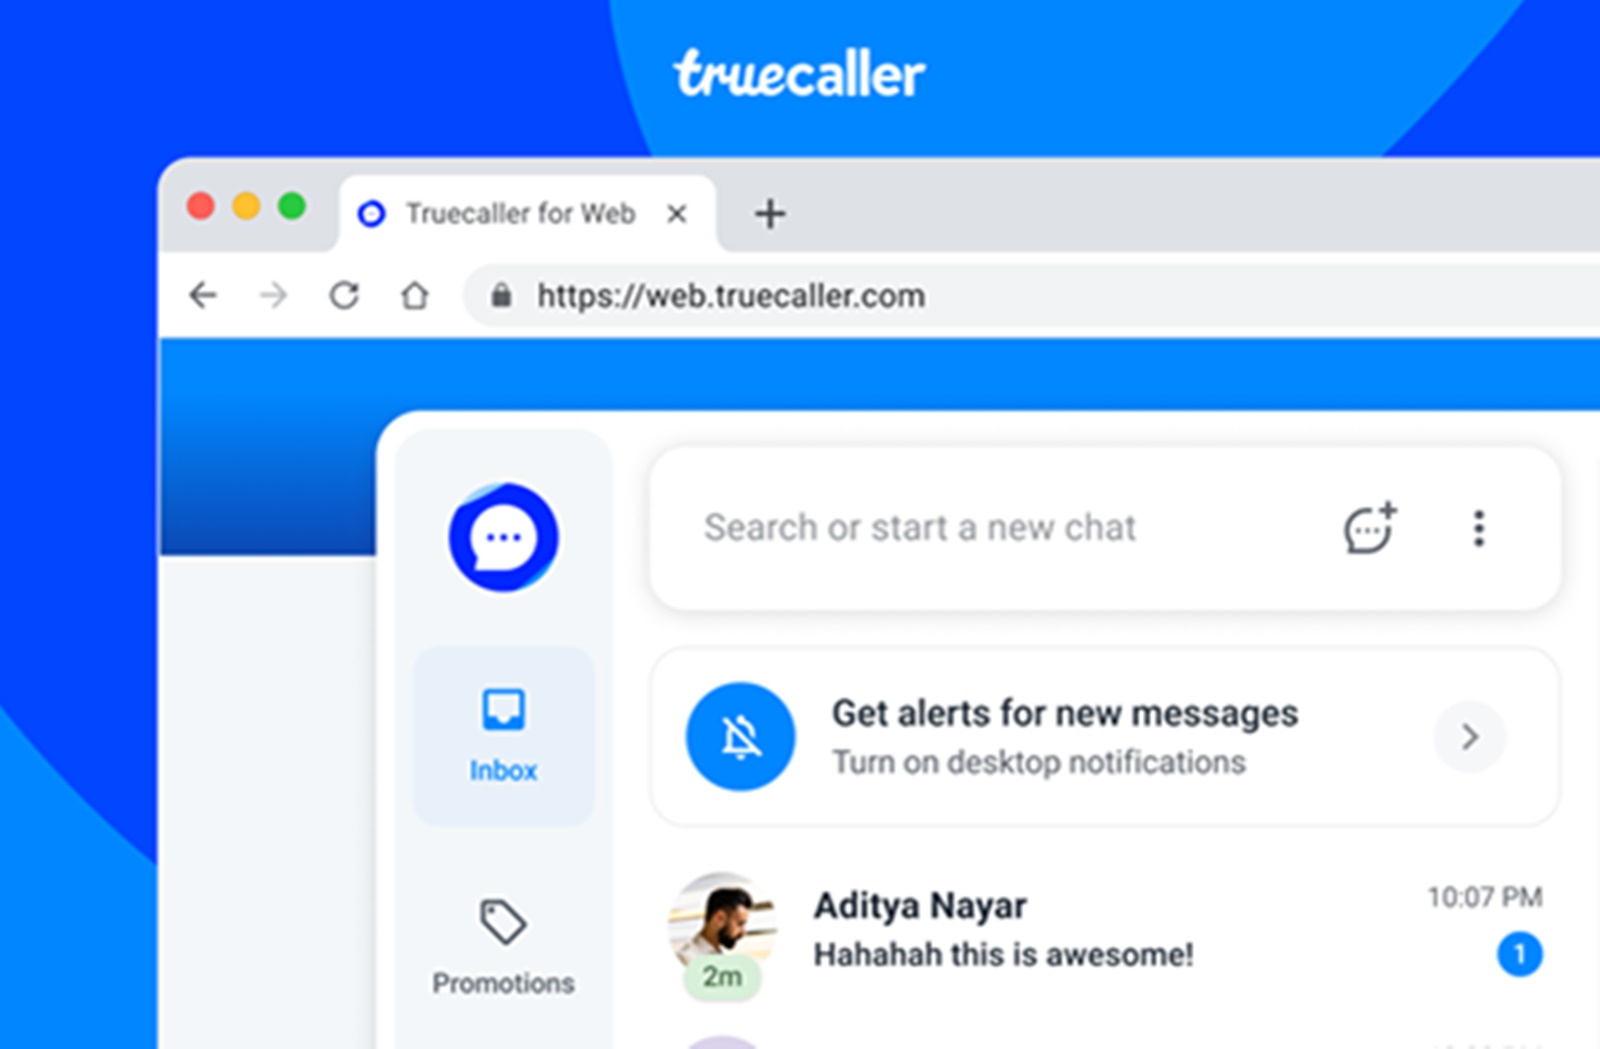 android, truecaller for web now available for android users in india